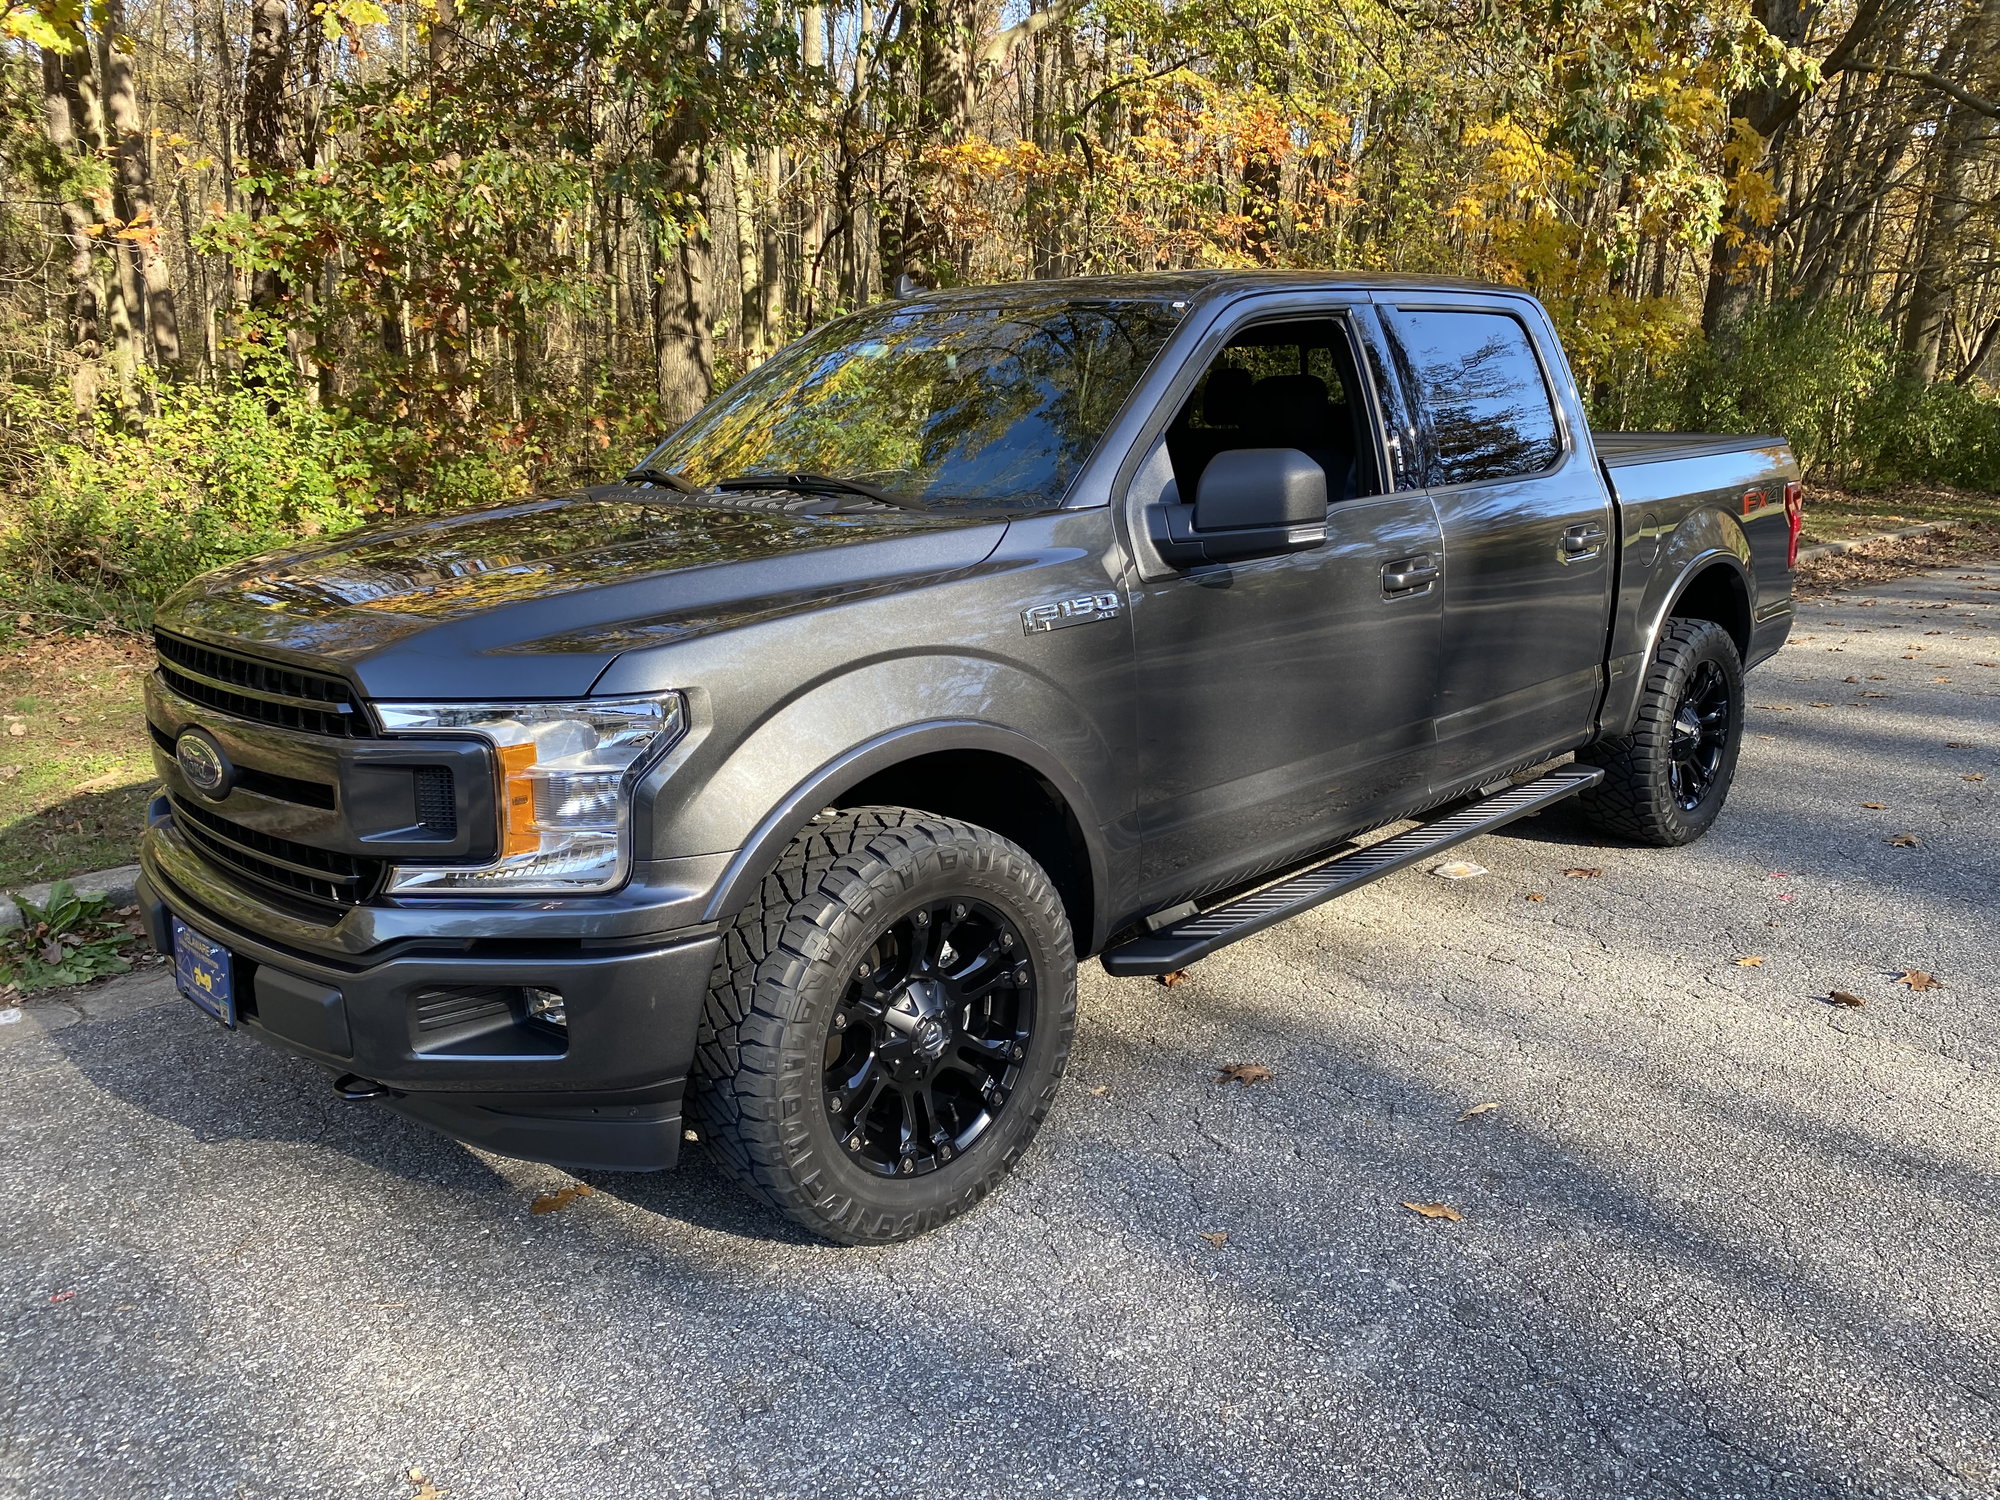 321 Customs - 2019 f150. 24s and 33s